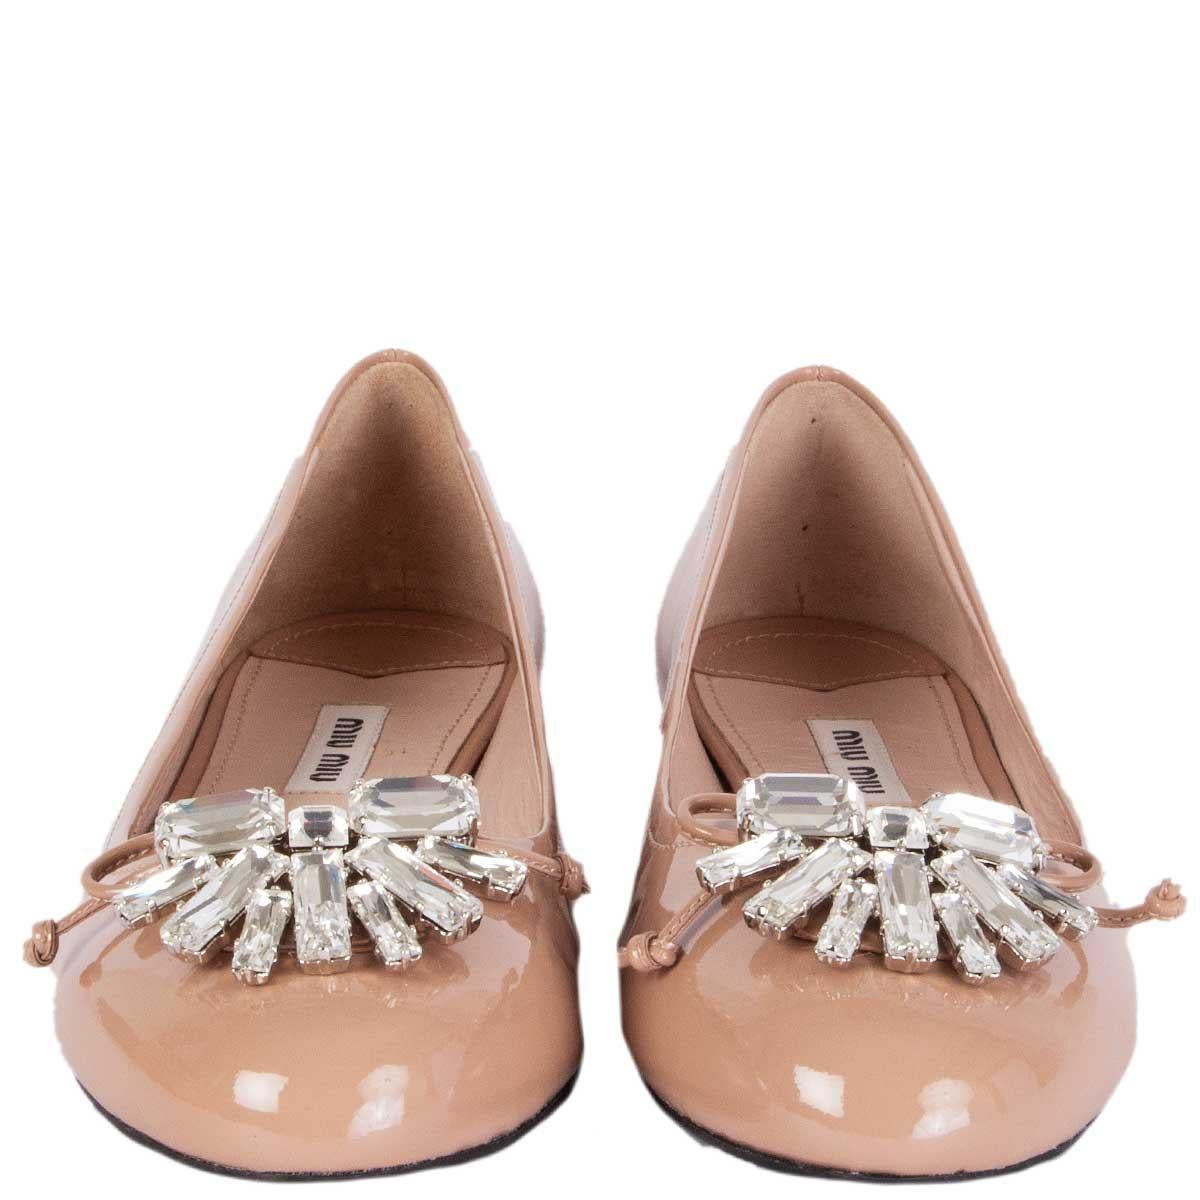 100% authentic Miu Miu ballet flats in nude patent leather embellished with Swarovski crystals at tip. Brand new. Come with dust bag. 

Measurements
Imprinted Size	37
Shoe Size	37
Inside Sole	24cm (9.4in)
Width	7.5cm (2.9in)
Heel	1.5cm